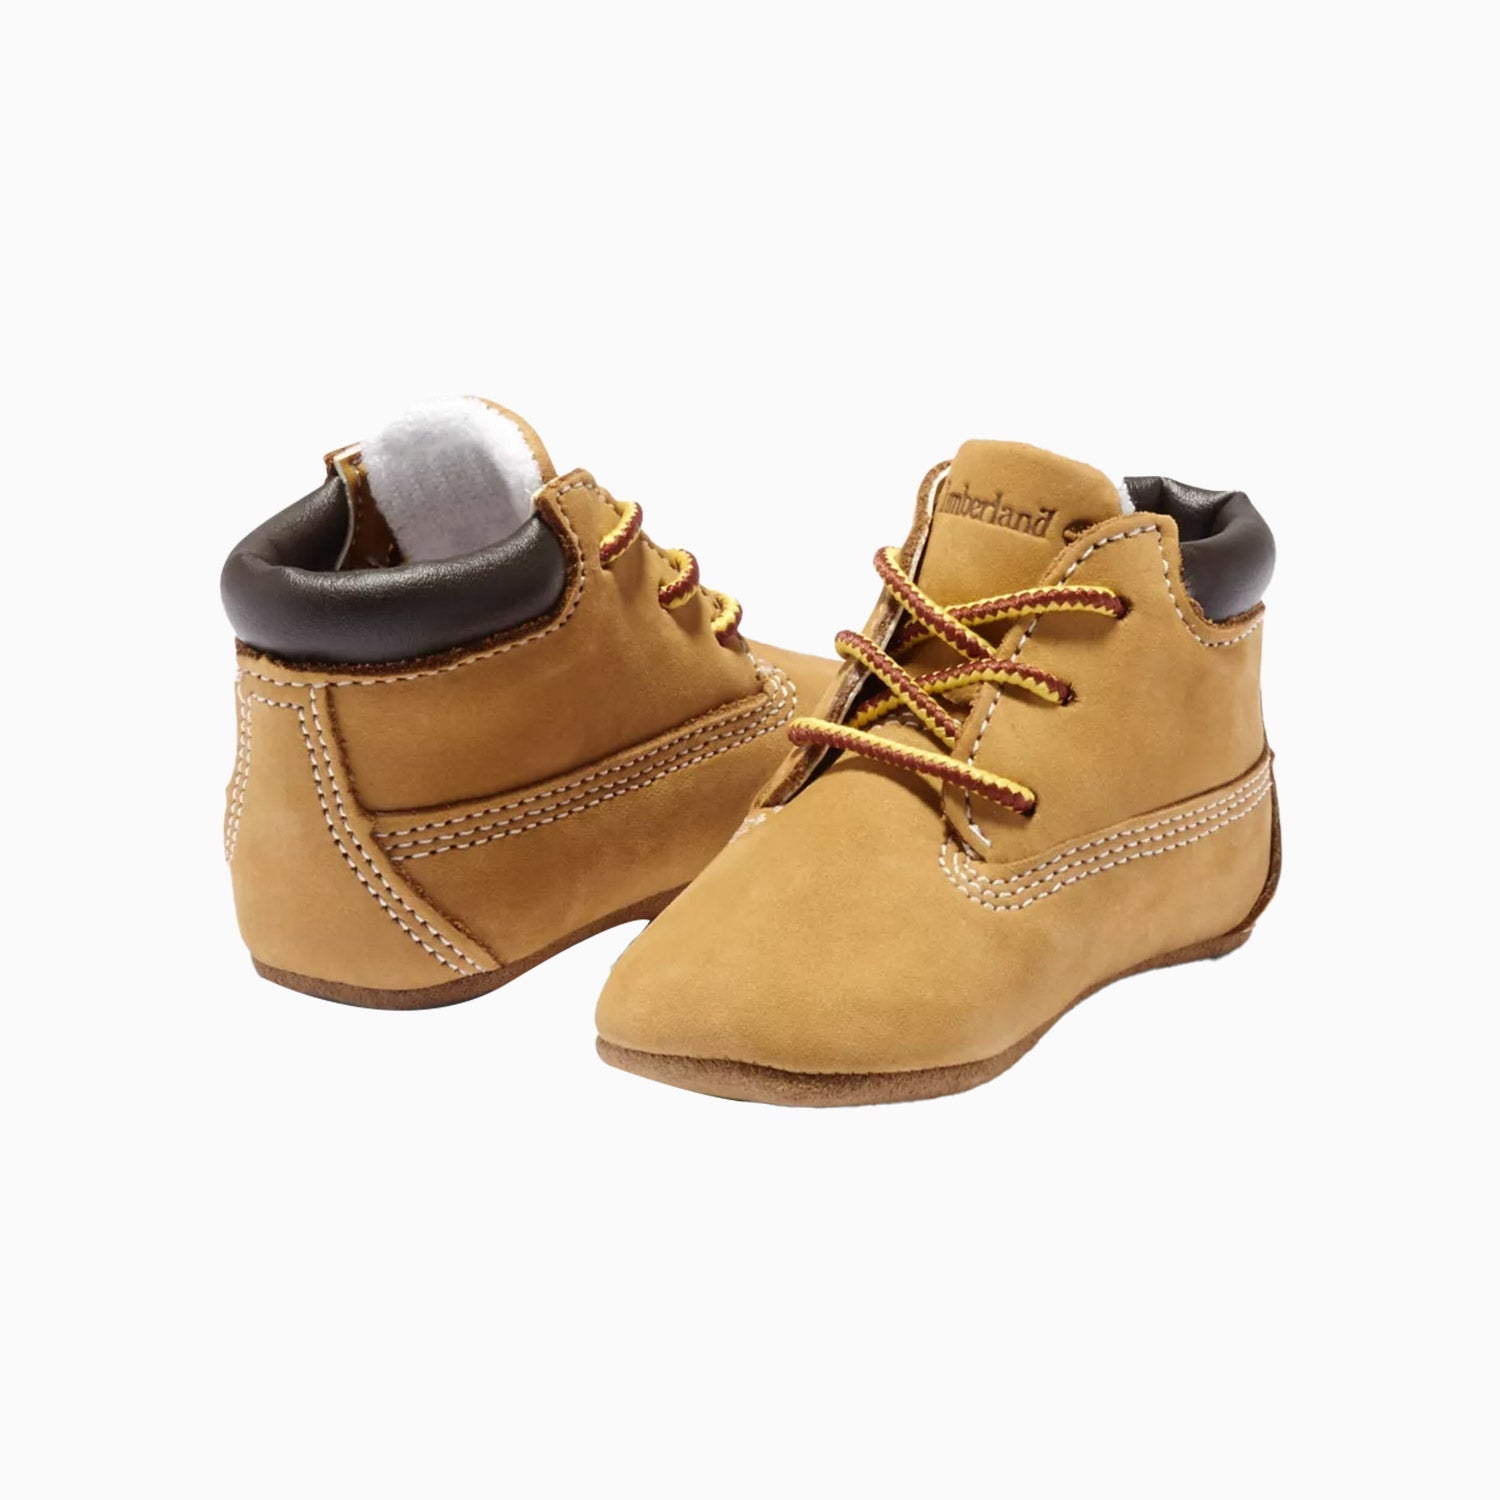 timberland-kids-crib-bootie-with-hat-set-infants-tb09589r231